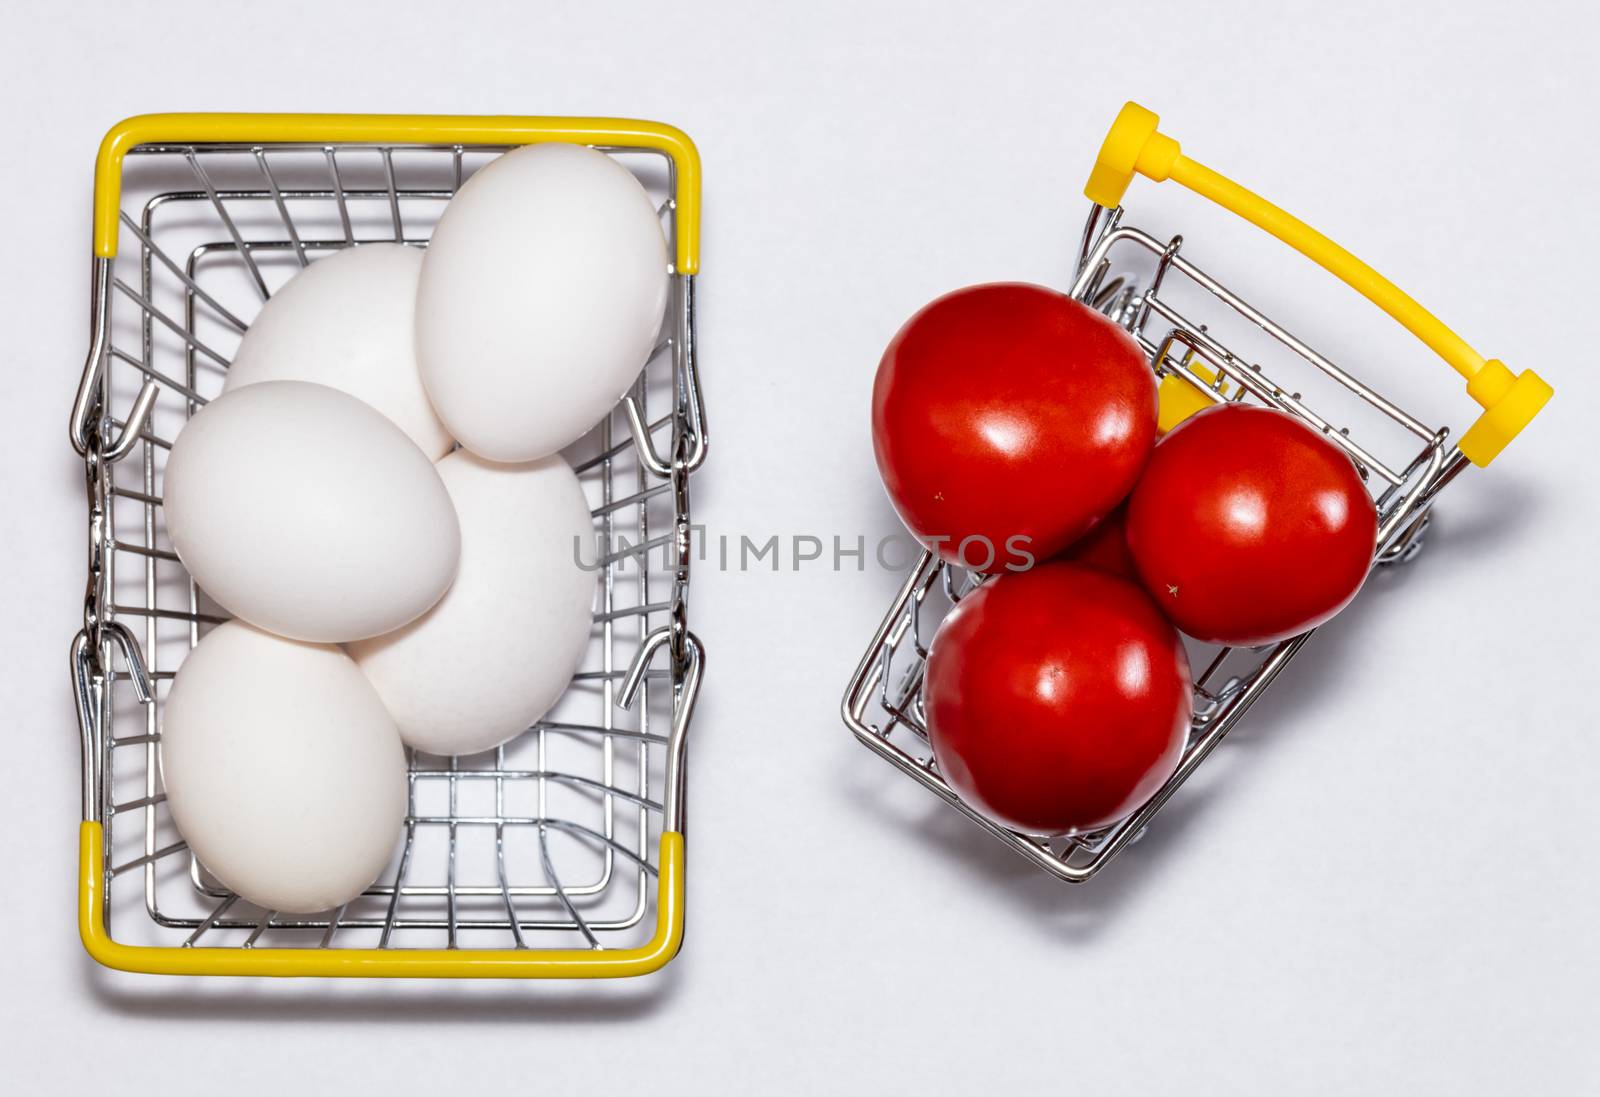 Fresh eggs and tomatoes in a shopping cart and a basket next to it. All mixed up. Top view. Shopping, purchasing, and food delivery concept. by DamantisZ